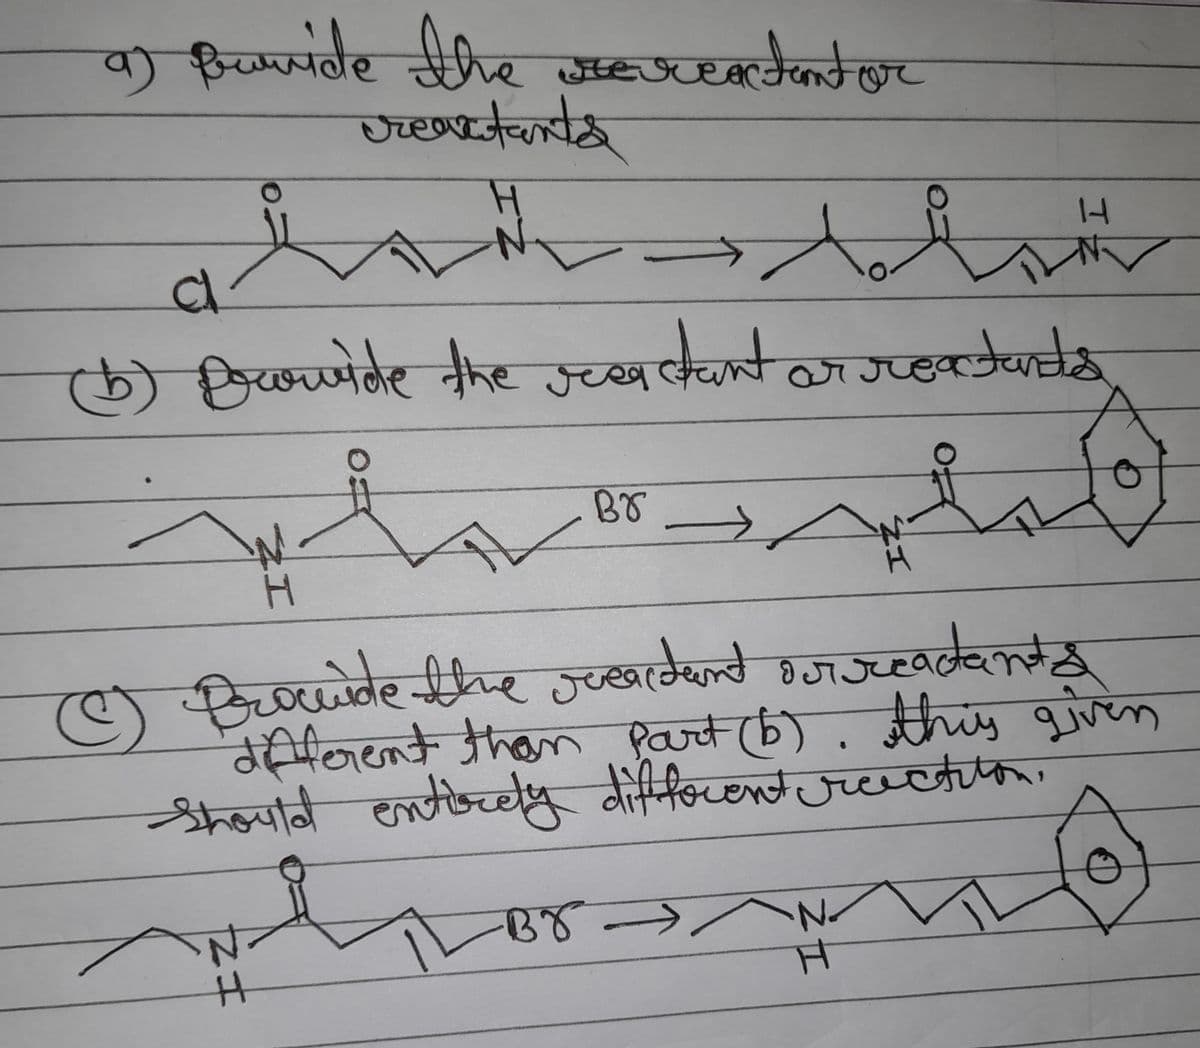 a) Buvide the sercatentor
reactants
H
loddtr
14
Cl
(b) provide the reactant or reaturda
ar reactants
Br
✓
H
o
C
(Ⓒ) Brocude the reardent sur readant
different than Part (b). this given
Should entirely different reaction.
IL
BY -
•N₂
H
121
N
H
ZI
ZI